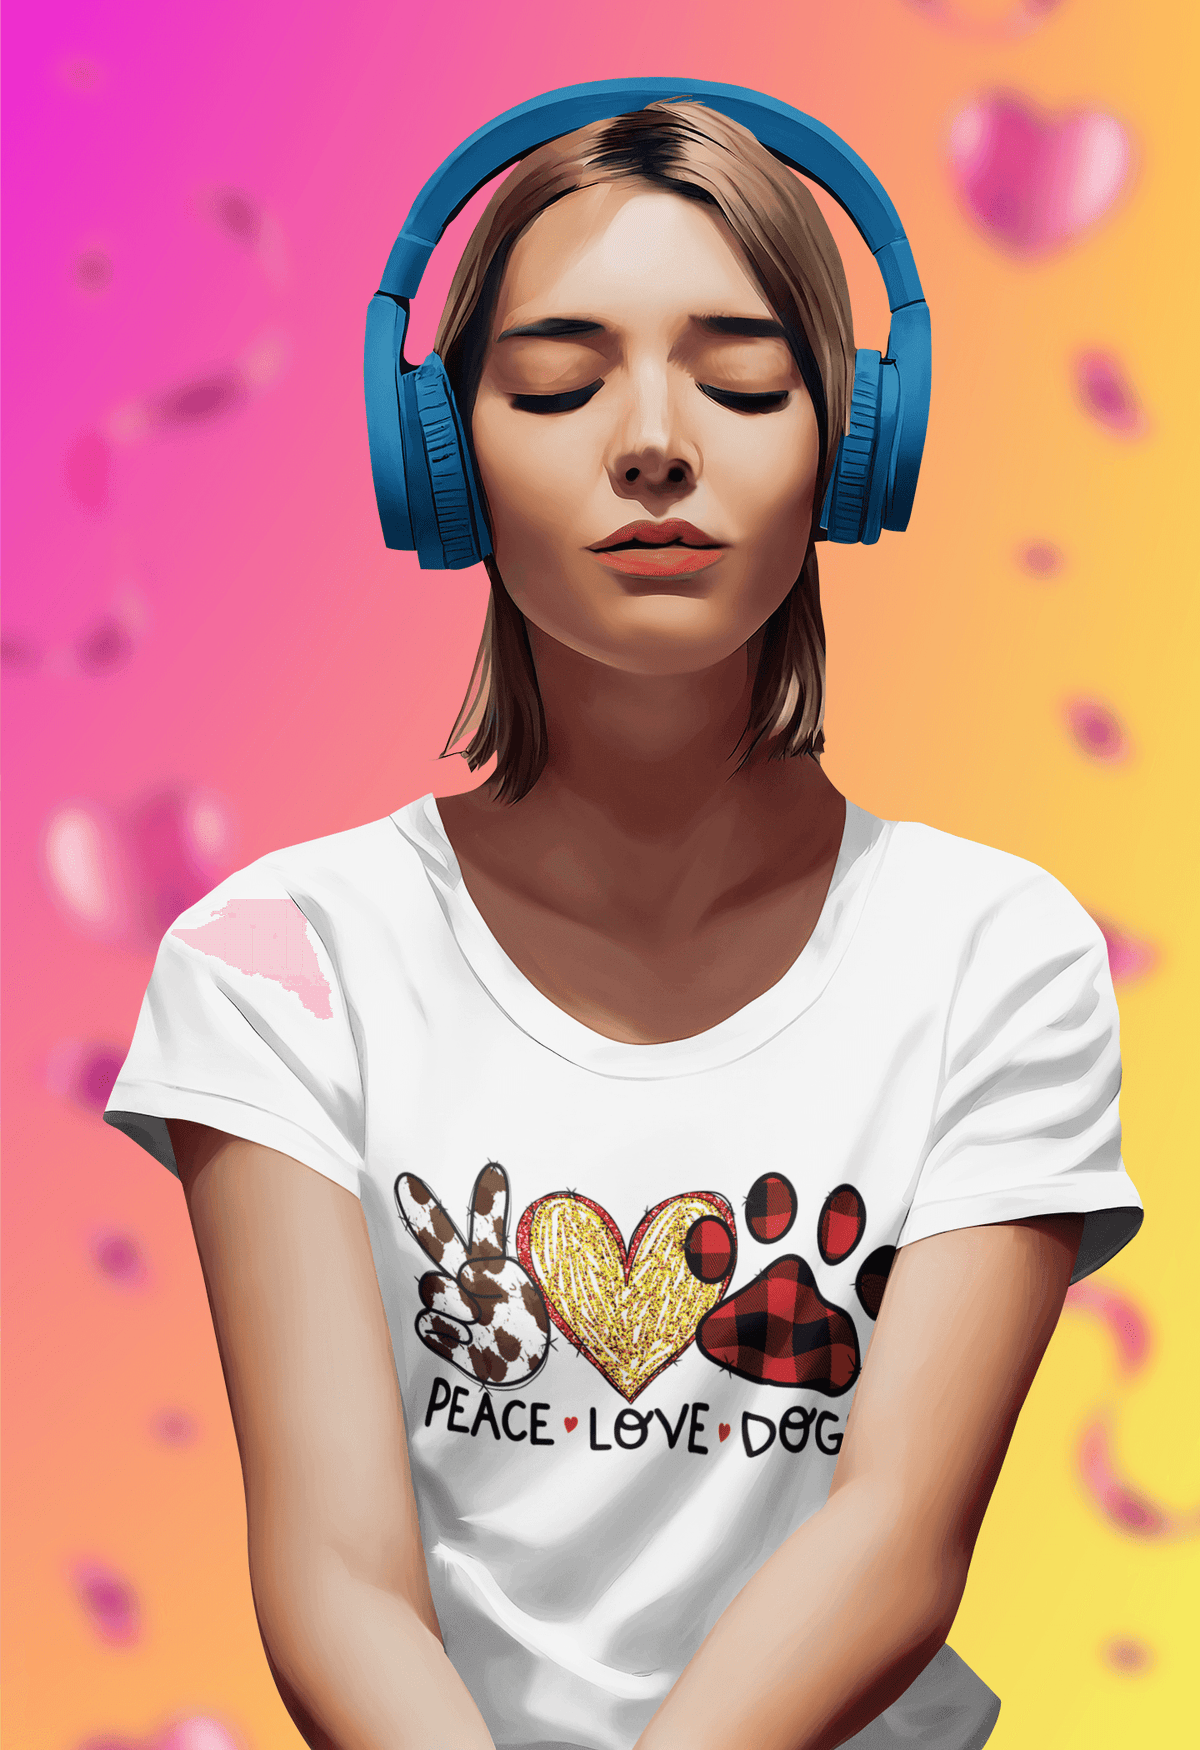 PEACE LOVE DOGS T-shirt-Regular Fit Tee-StylinArts